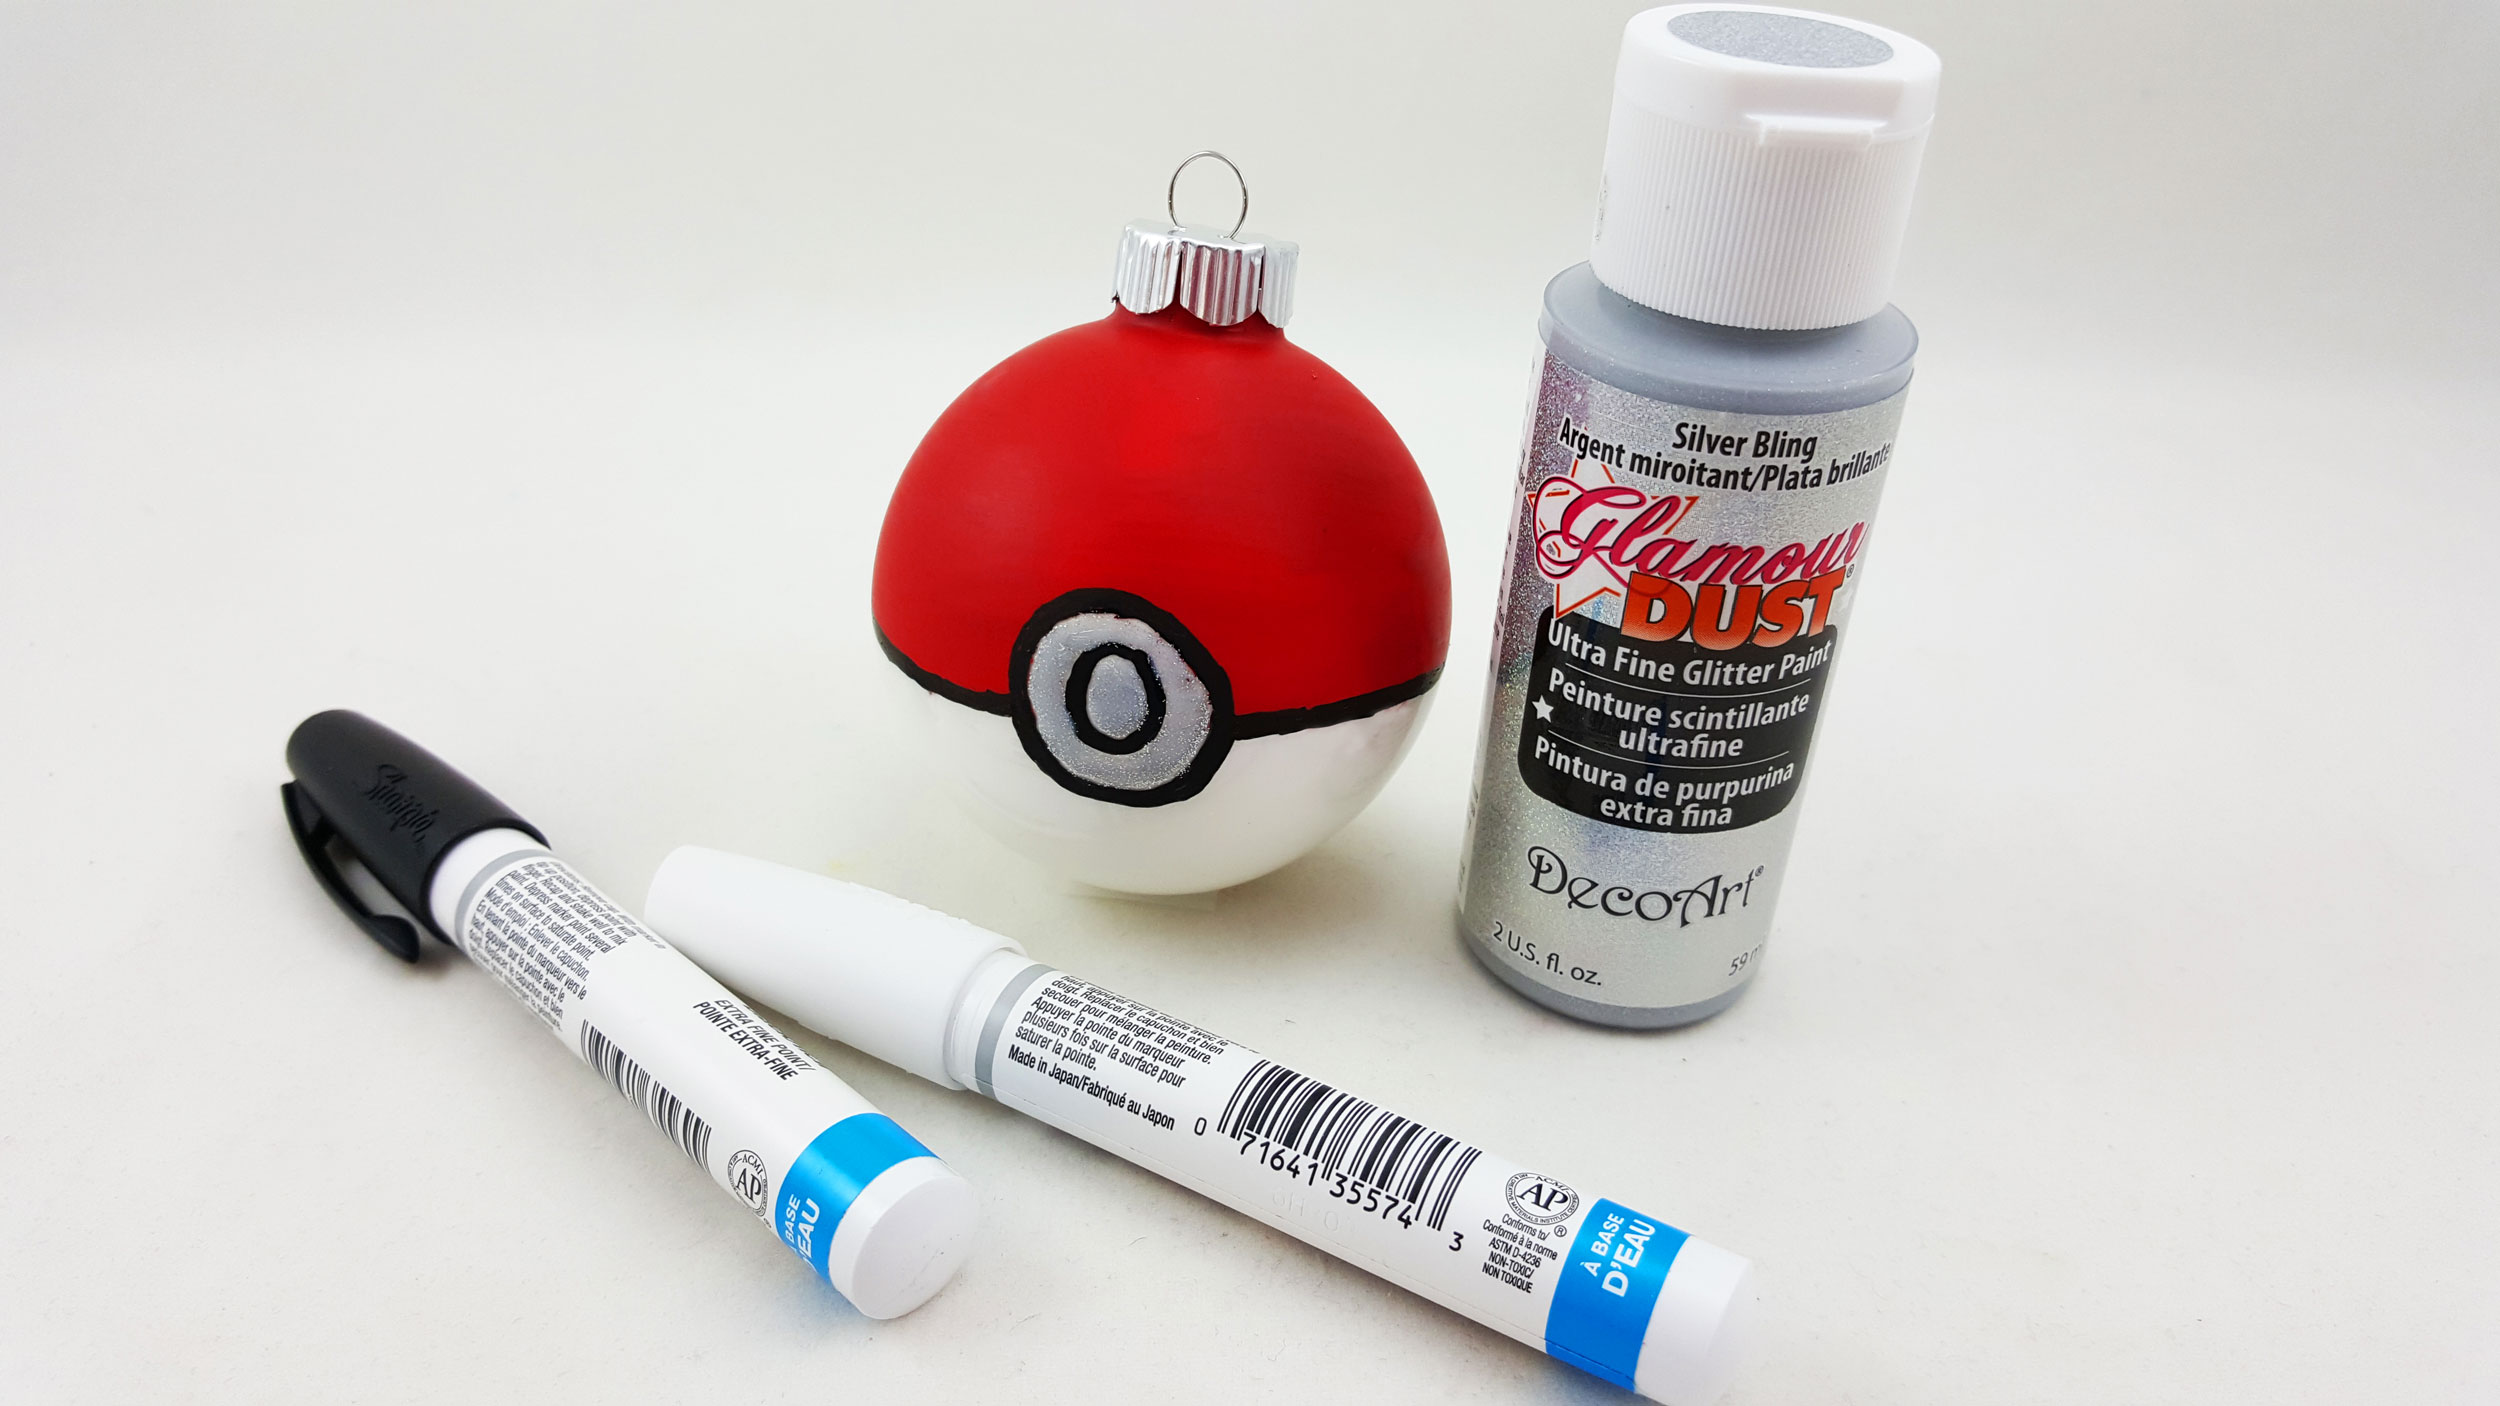 The third and final step to make a Pokeball ornament is to use the black paint market to draw a line across the hemisphere of the ball and the circle on the front. Use silver glitter paint to add a shiny detail to the circle on the front. | OrnamentShop.com